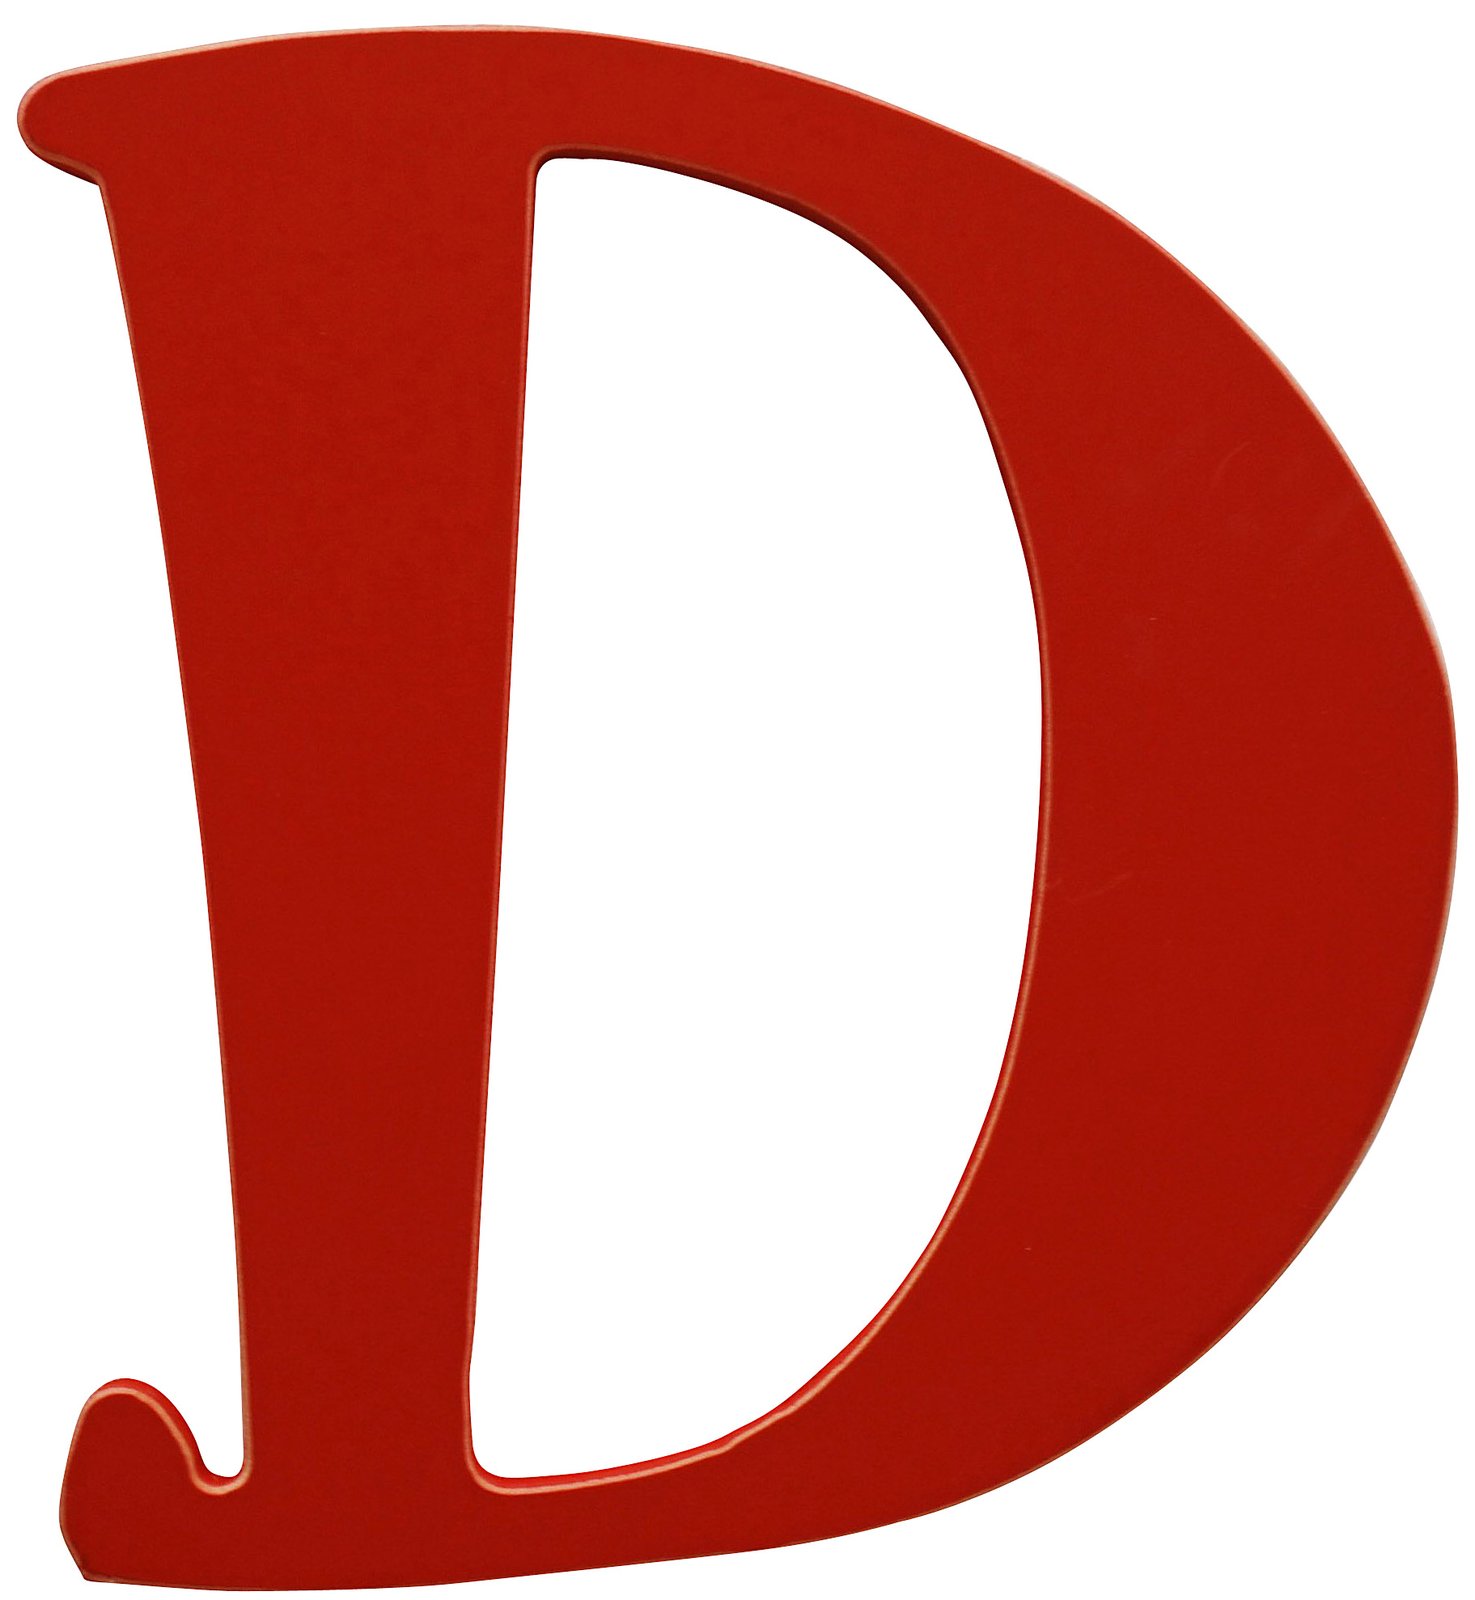 Free Letter D, Download Free Letter D png images, Free ClipArts on ...